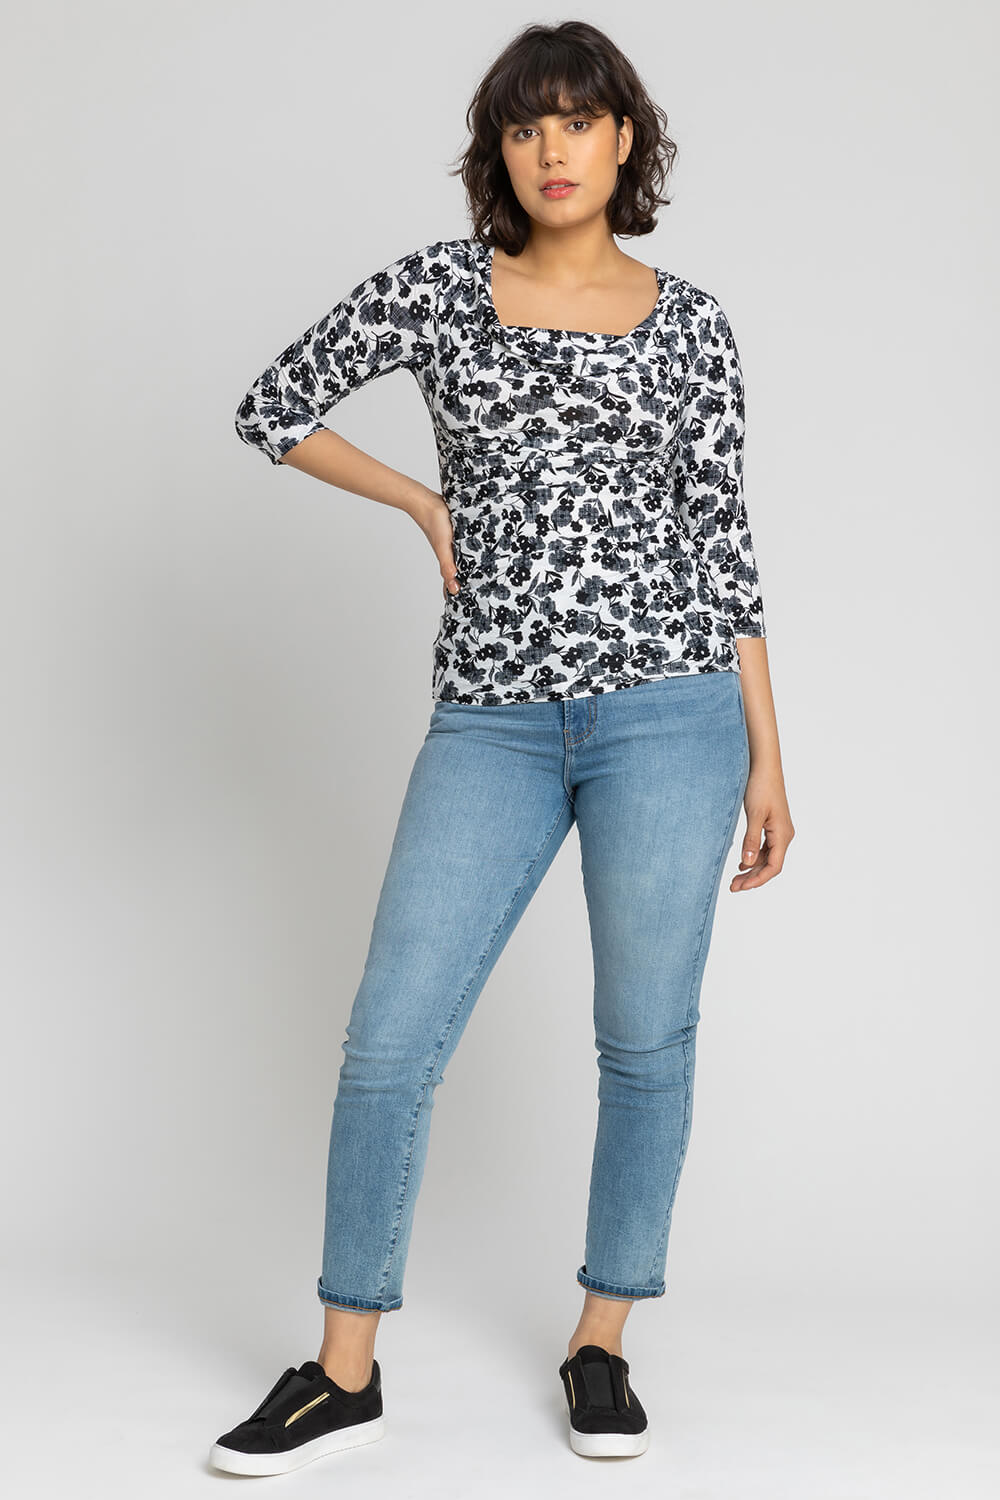 Ivory  Floral Print Cowl Neck Top, Image 3 of 4